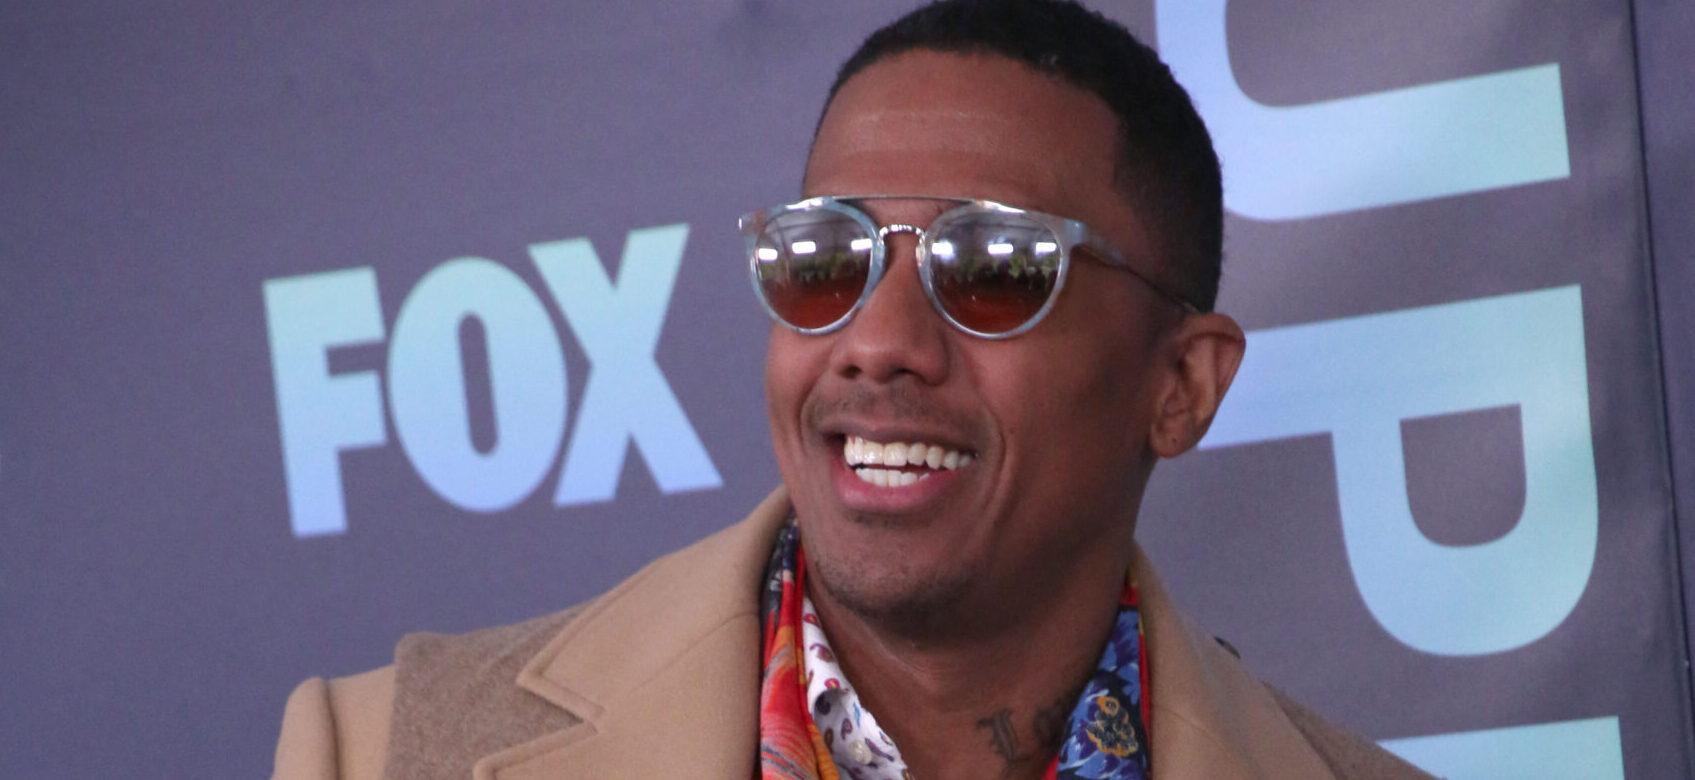 Nick Cannon Applauds Himself For ‘Trying My Best’ As His Two Daughters Bond